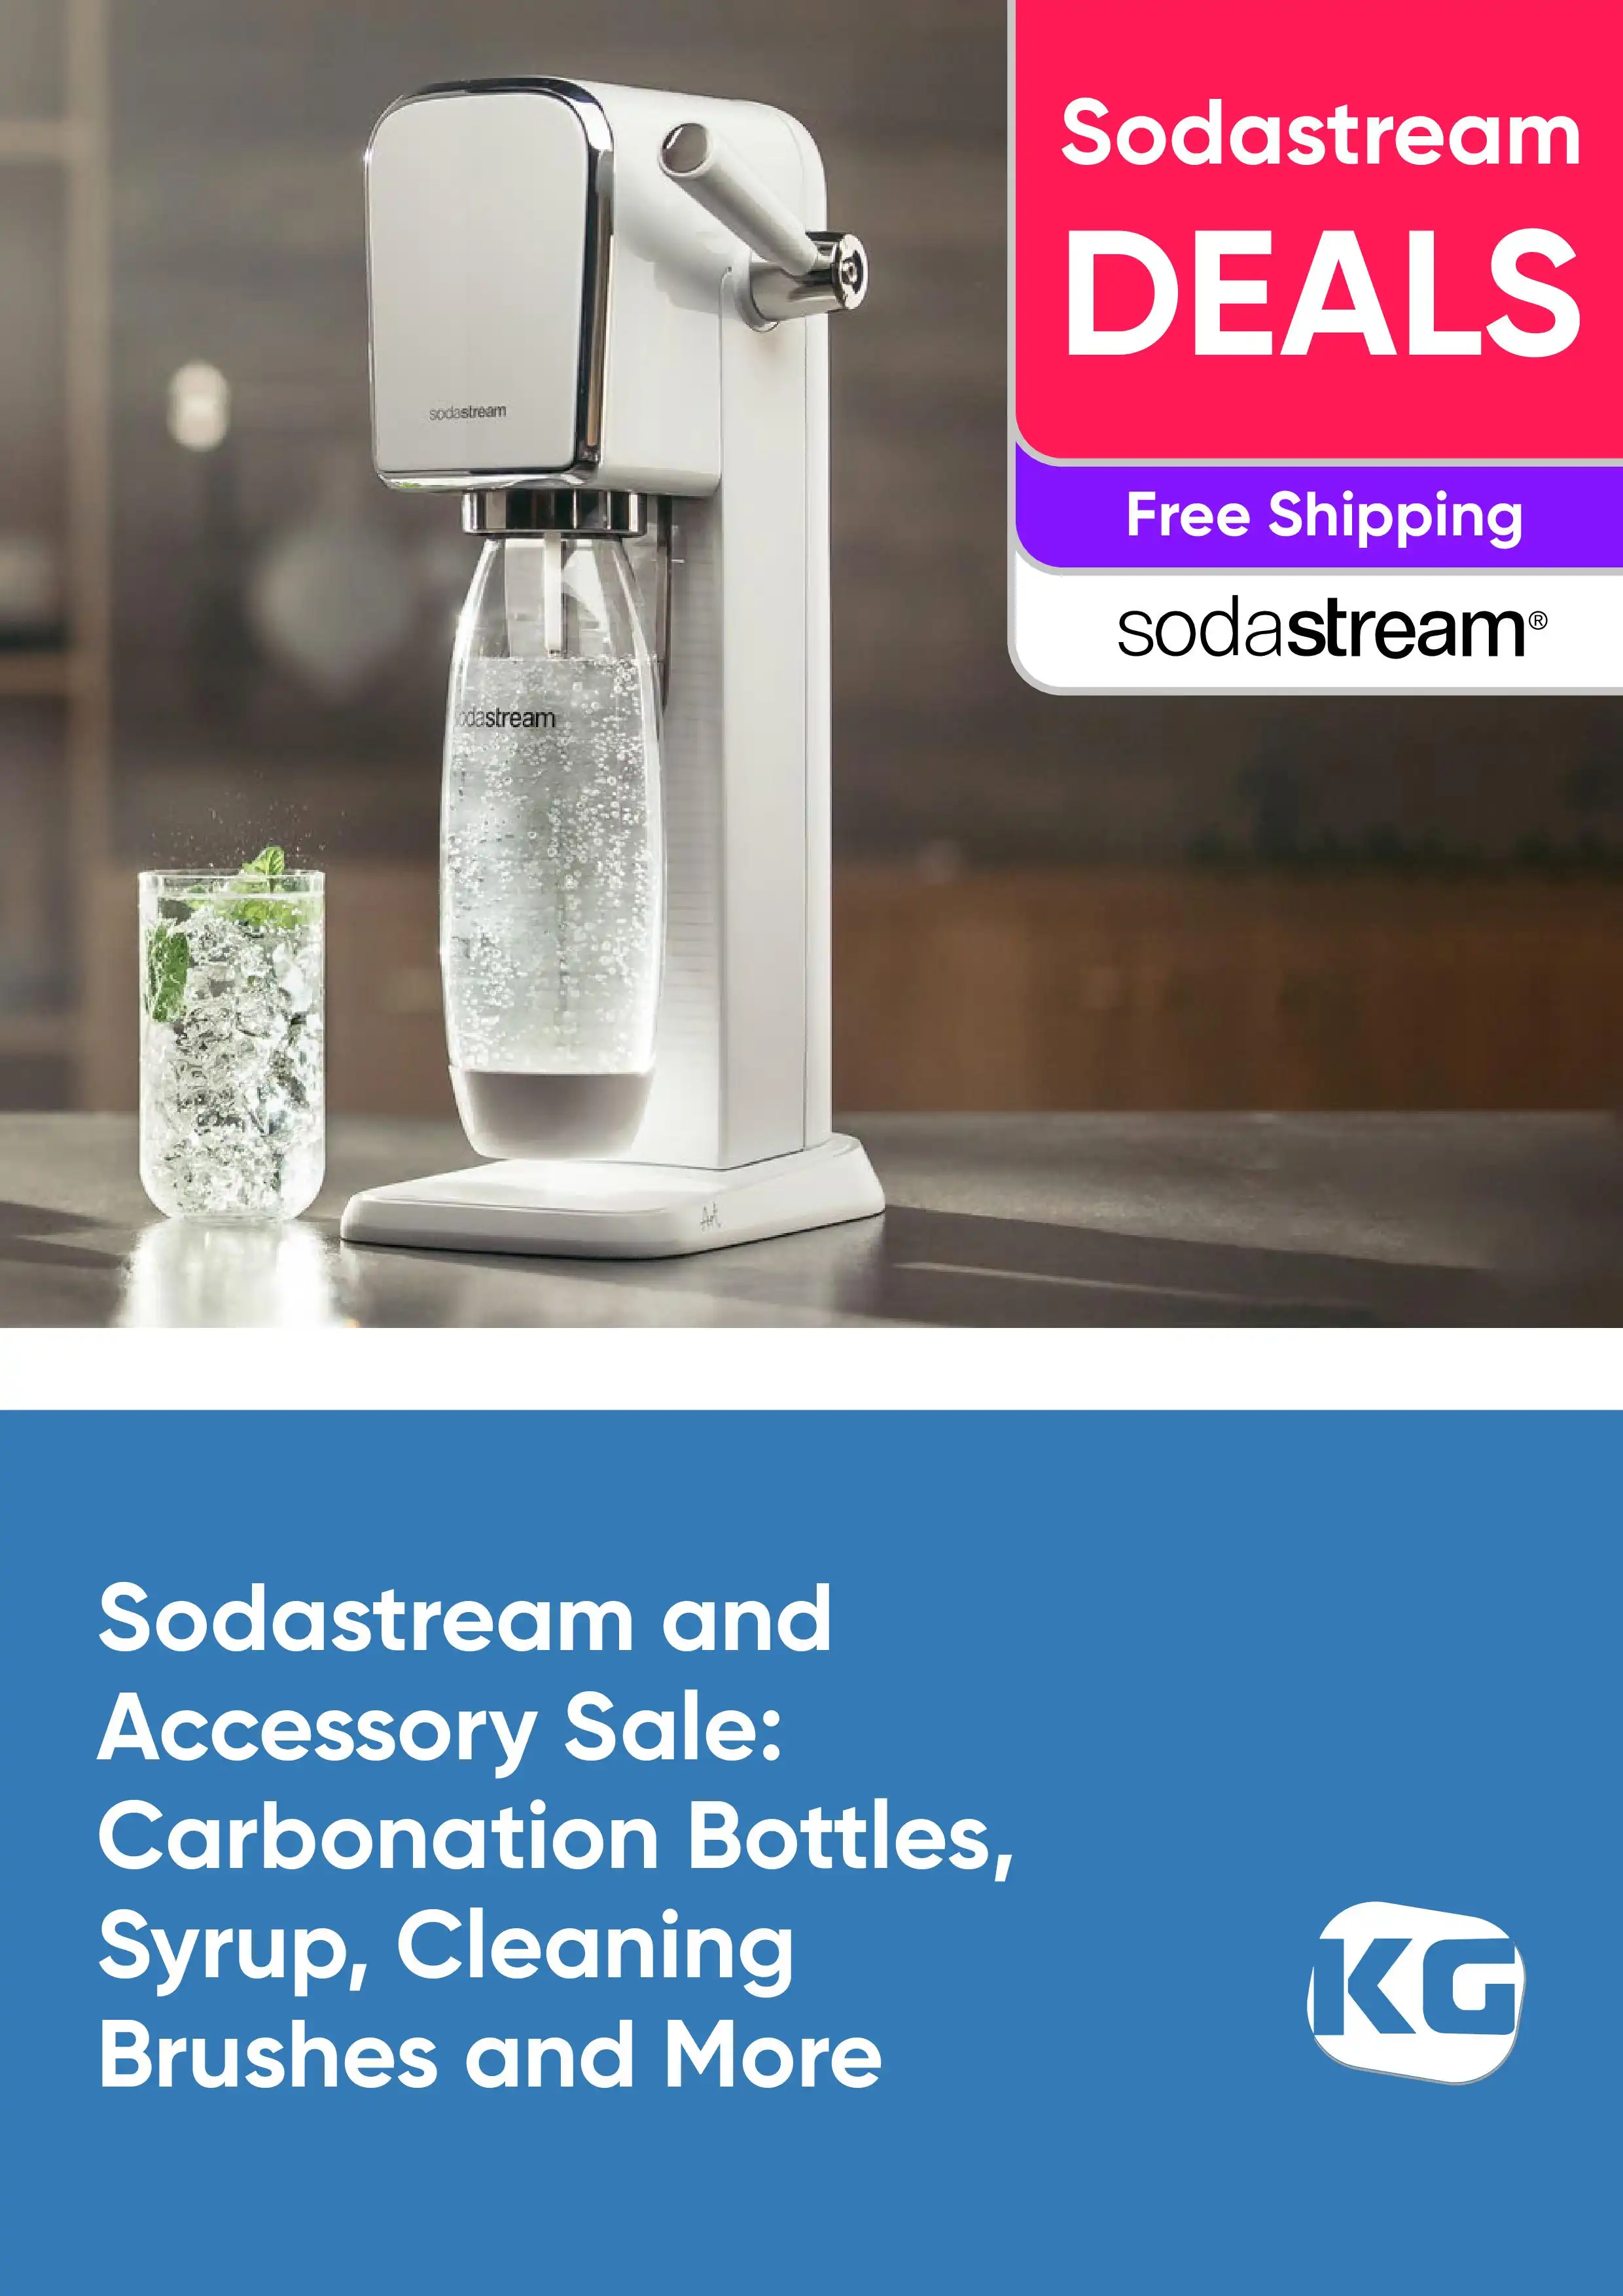 Sodastream and Accessory Sale - Carbonation Bottles, Syrup, Cleaning Brushes and More - Sodastream